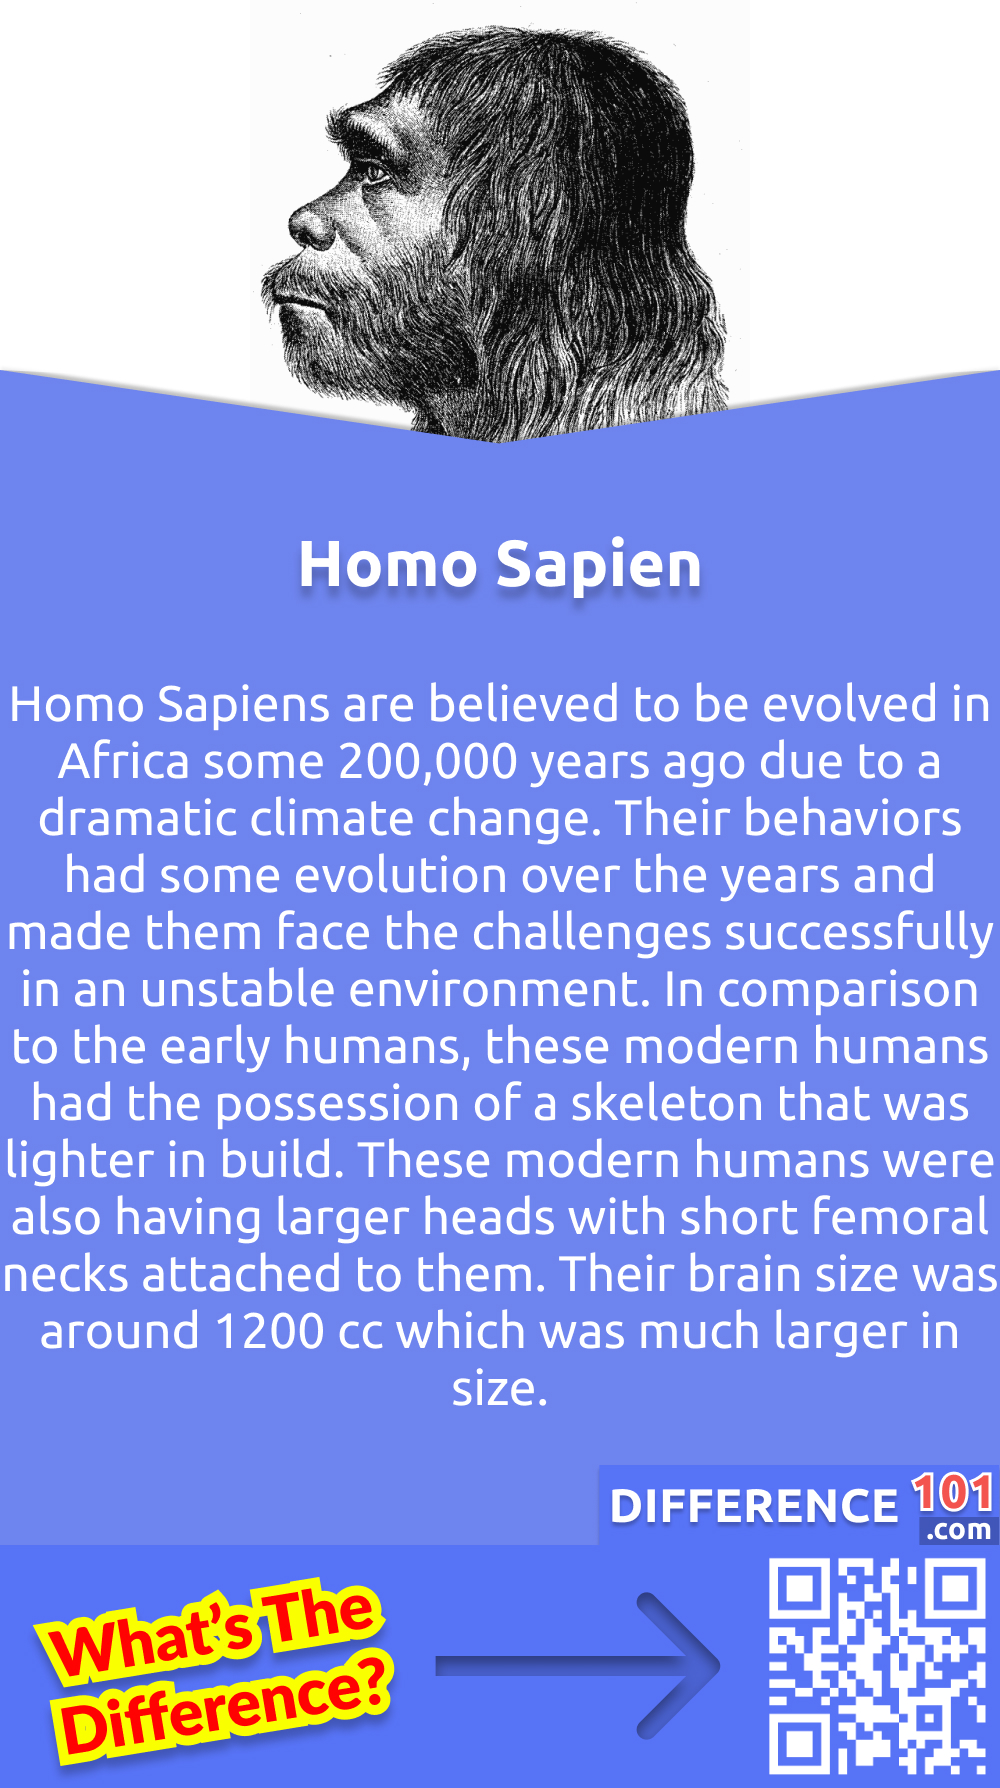 Who is Homo Sapien? Homo Sapiens are believed to be evolved in Africa some 200,000 years ago due to a dramatic climate change. Their behaviors had some evolution over the years and made them face the challenges successfully in an unstable environment. In comparison to the early humans, these modern humans had the possession of a skeleton that was lighter in build. These modern humans were also having larger heads with short femoral necks attached to them. Their brain size was around 1200 cc which was much larger in size. 